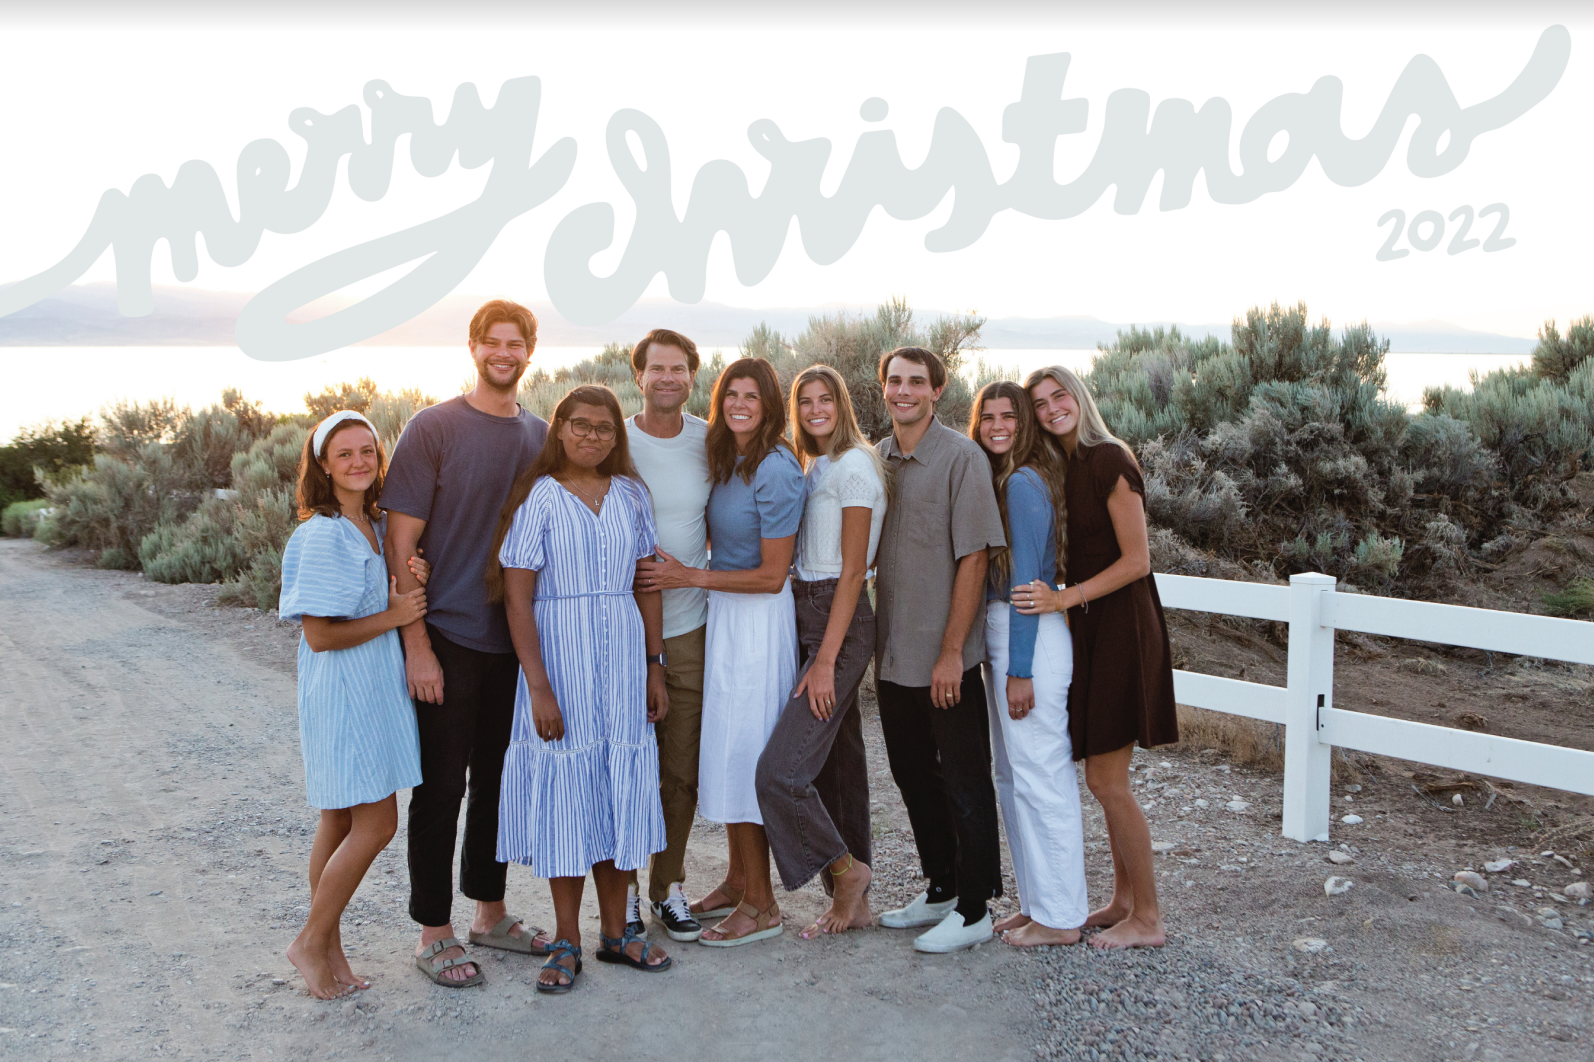 Merry Christmas from our family to yours